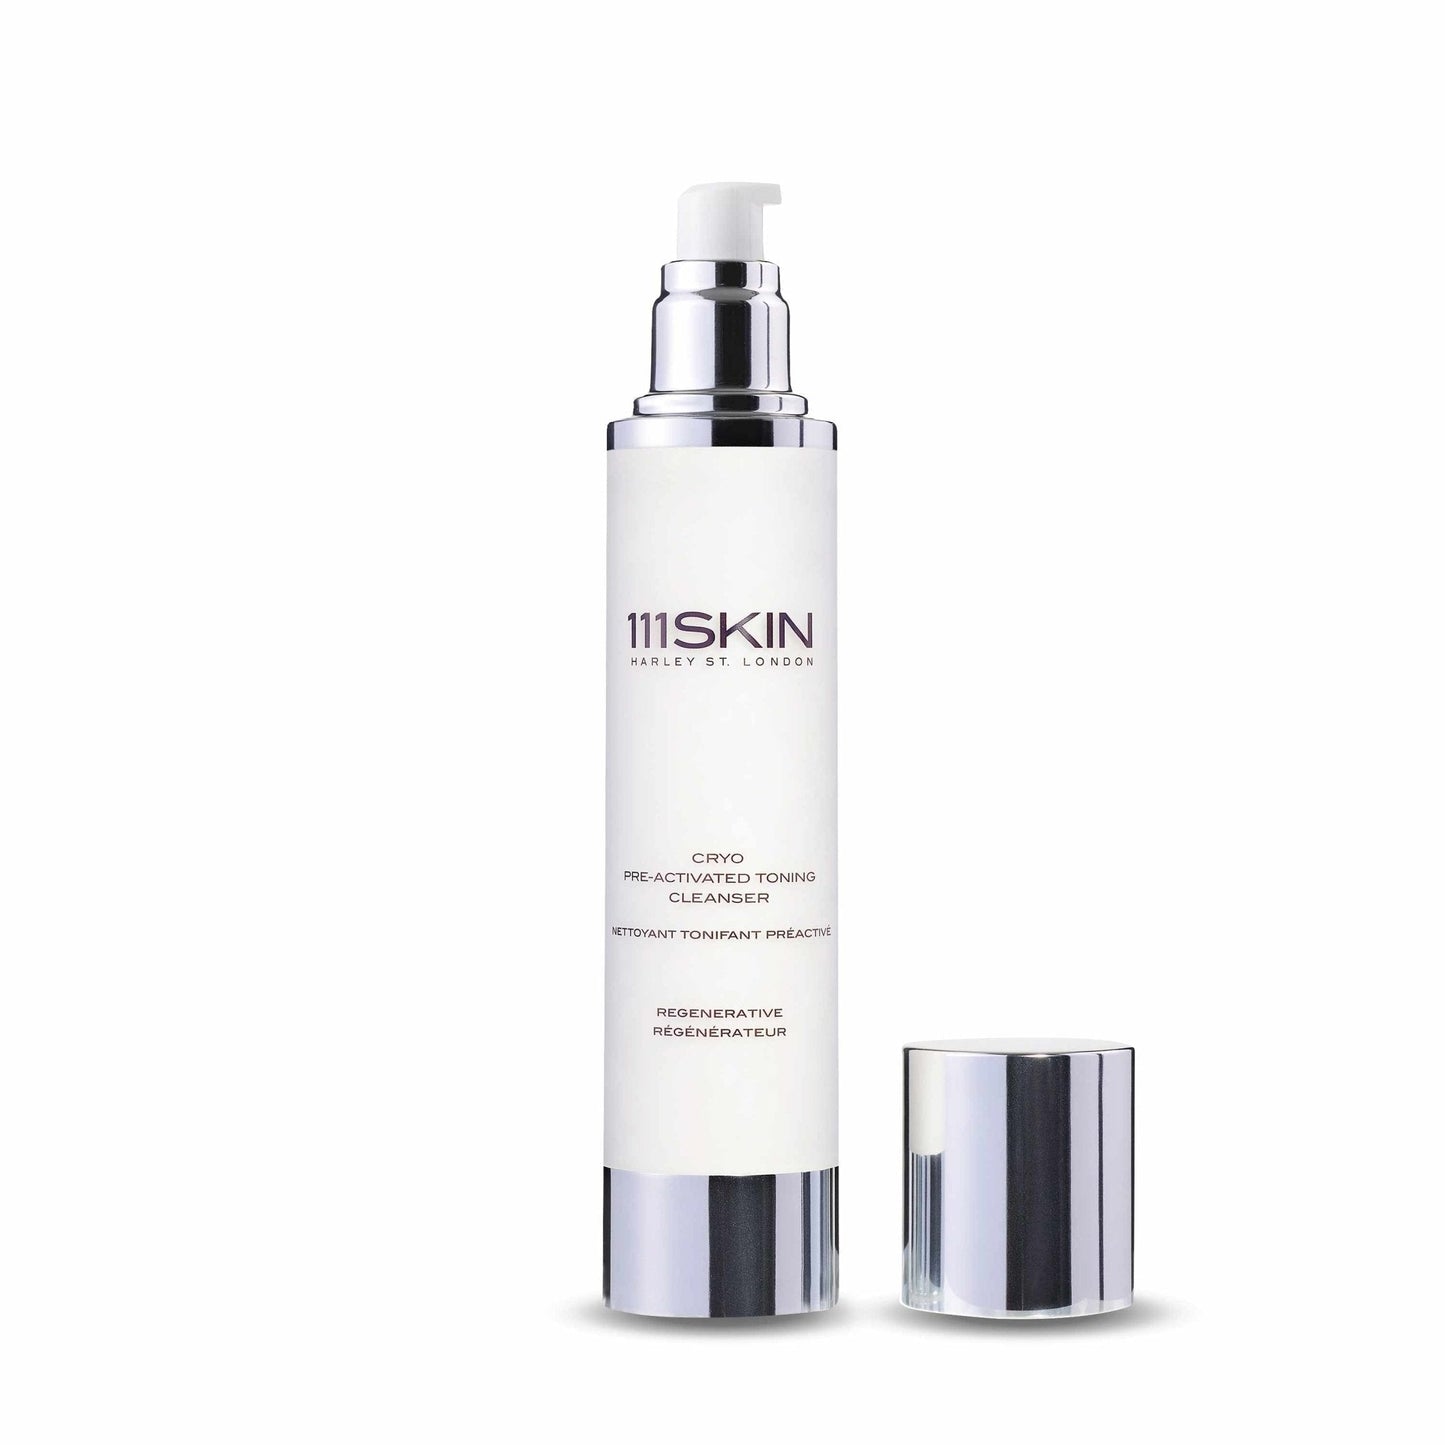 Cryo Pre-Activated Toning Cleanser - 111SKIN UK